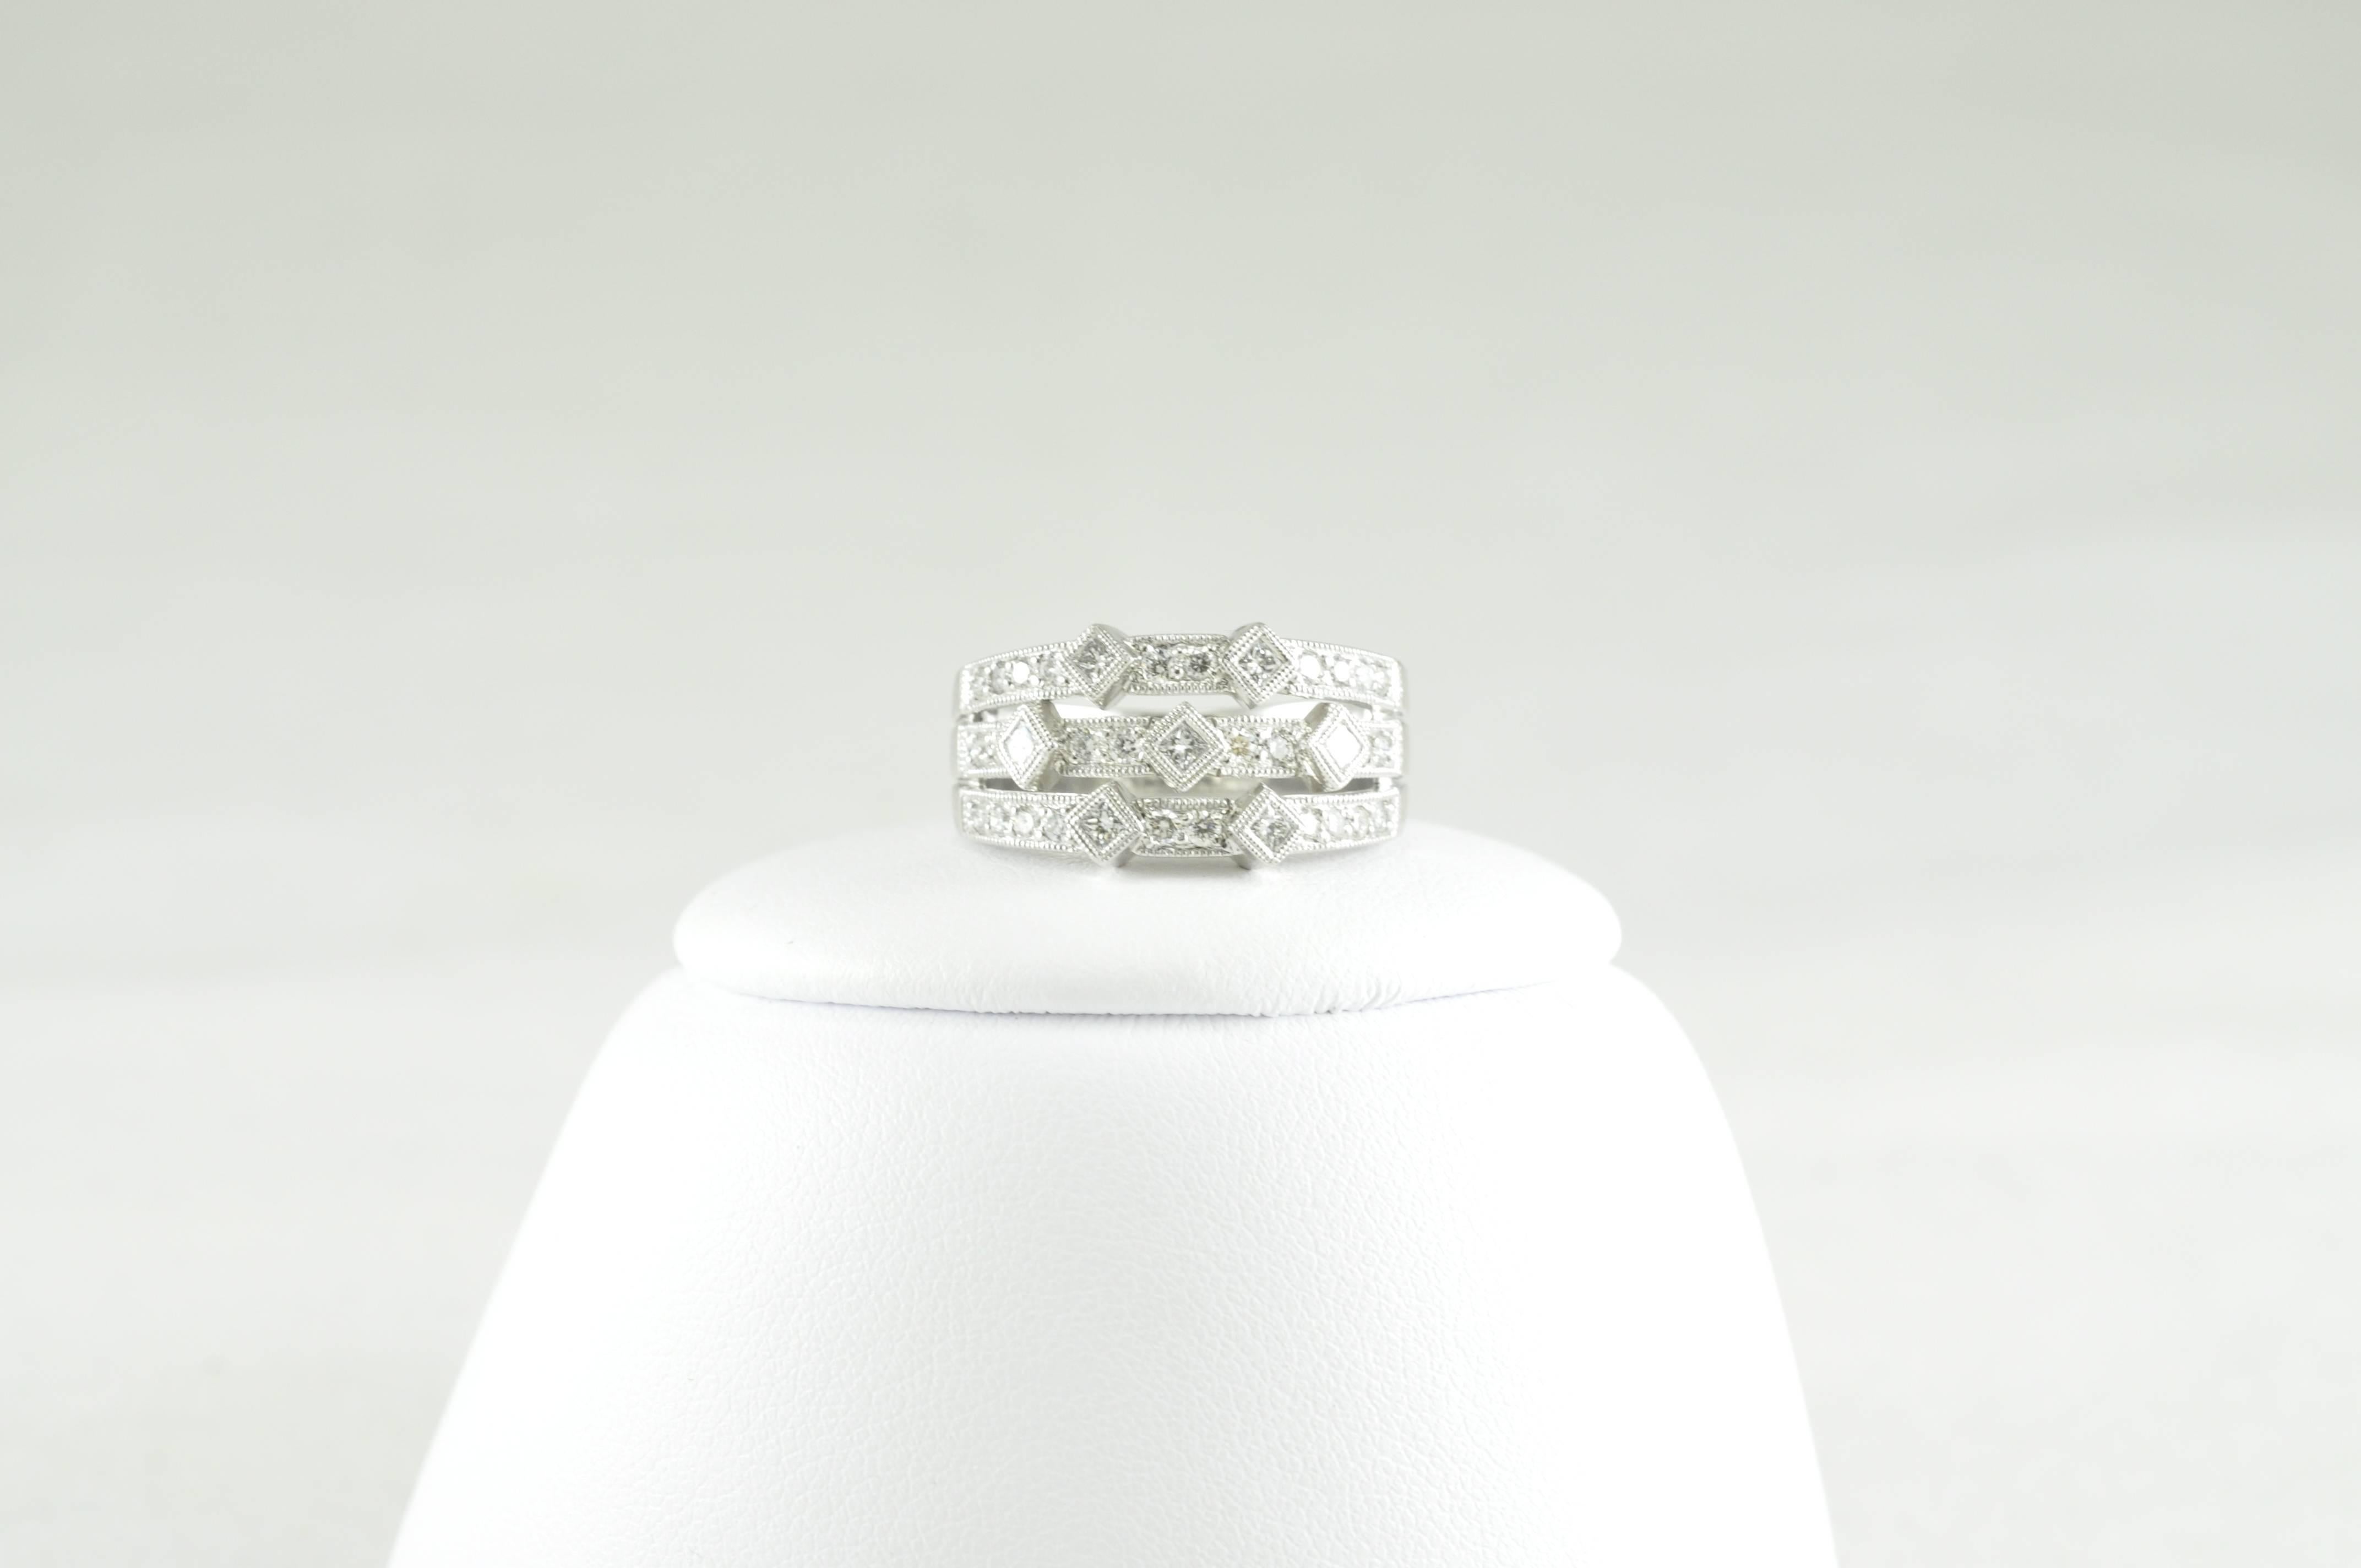 Platinum and Diamond Ring with .45CT Round and .19CT Princess Cut Diamonds.  Made by Award Winning Designer, Jye's!  Exquisite Design. Diamonds are F-G Color V/S1 Clarity.   Size 6.5 but can be sized. 